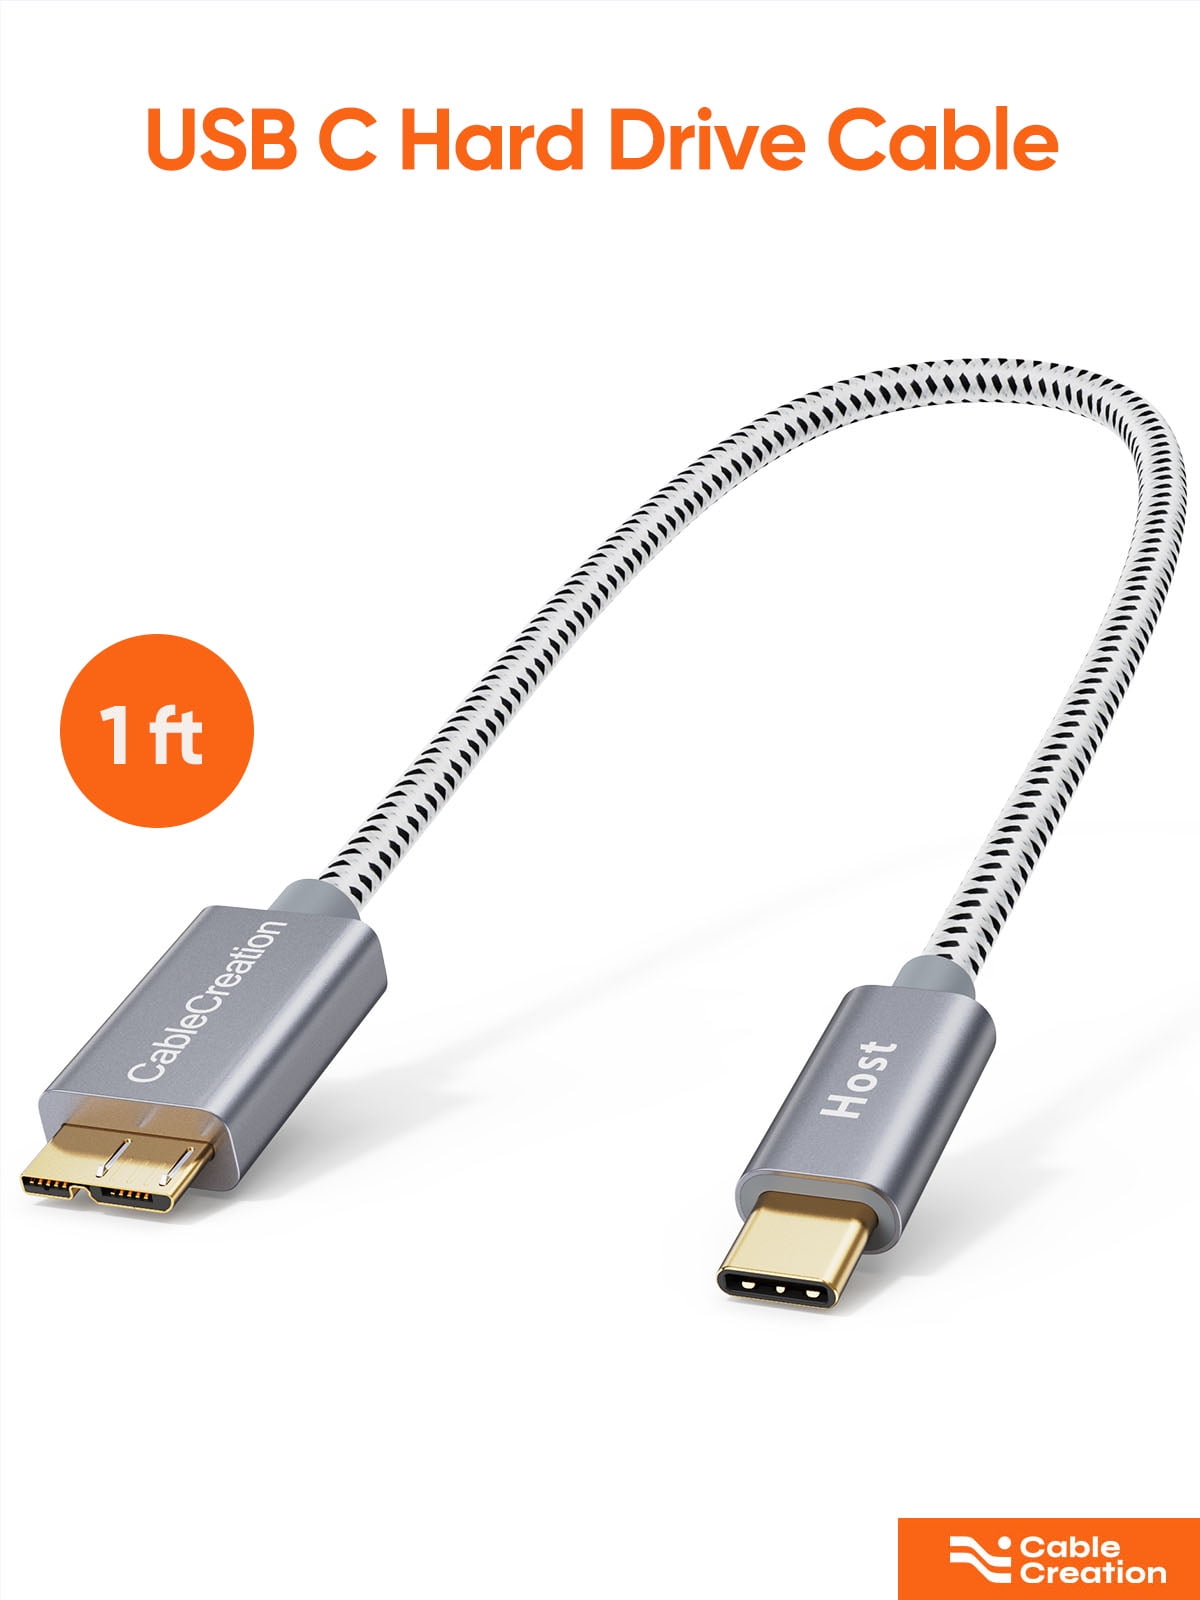 CLEARANCE under 10 1ft Short USB 3.1 C to Micro B Cable,10Gbps Type C to Hard Drive Cable Compatible with PC,Laptop, SSD Walmart.com